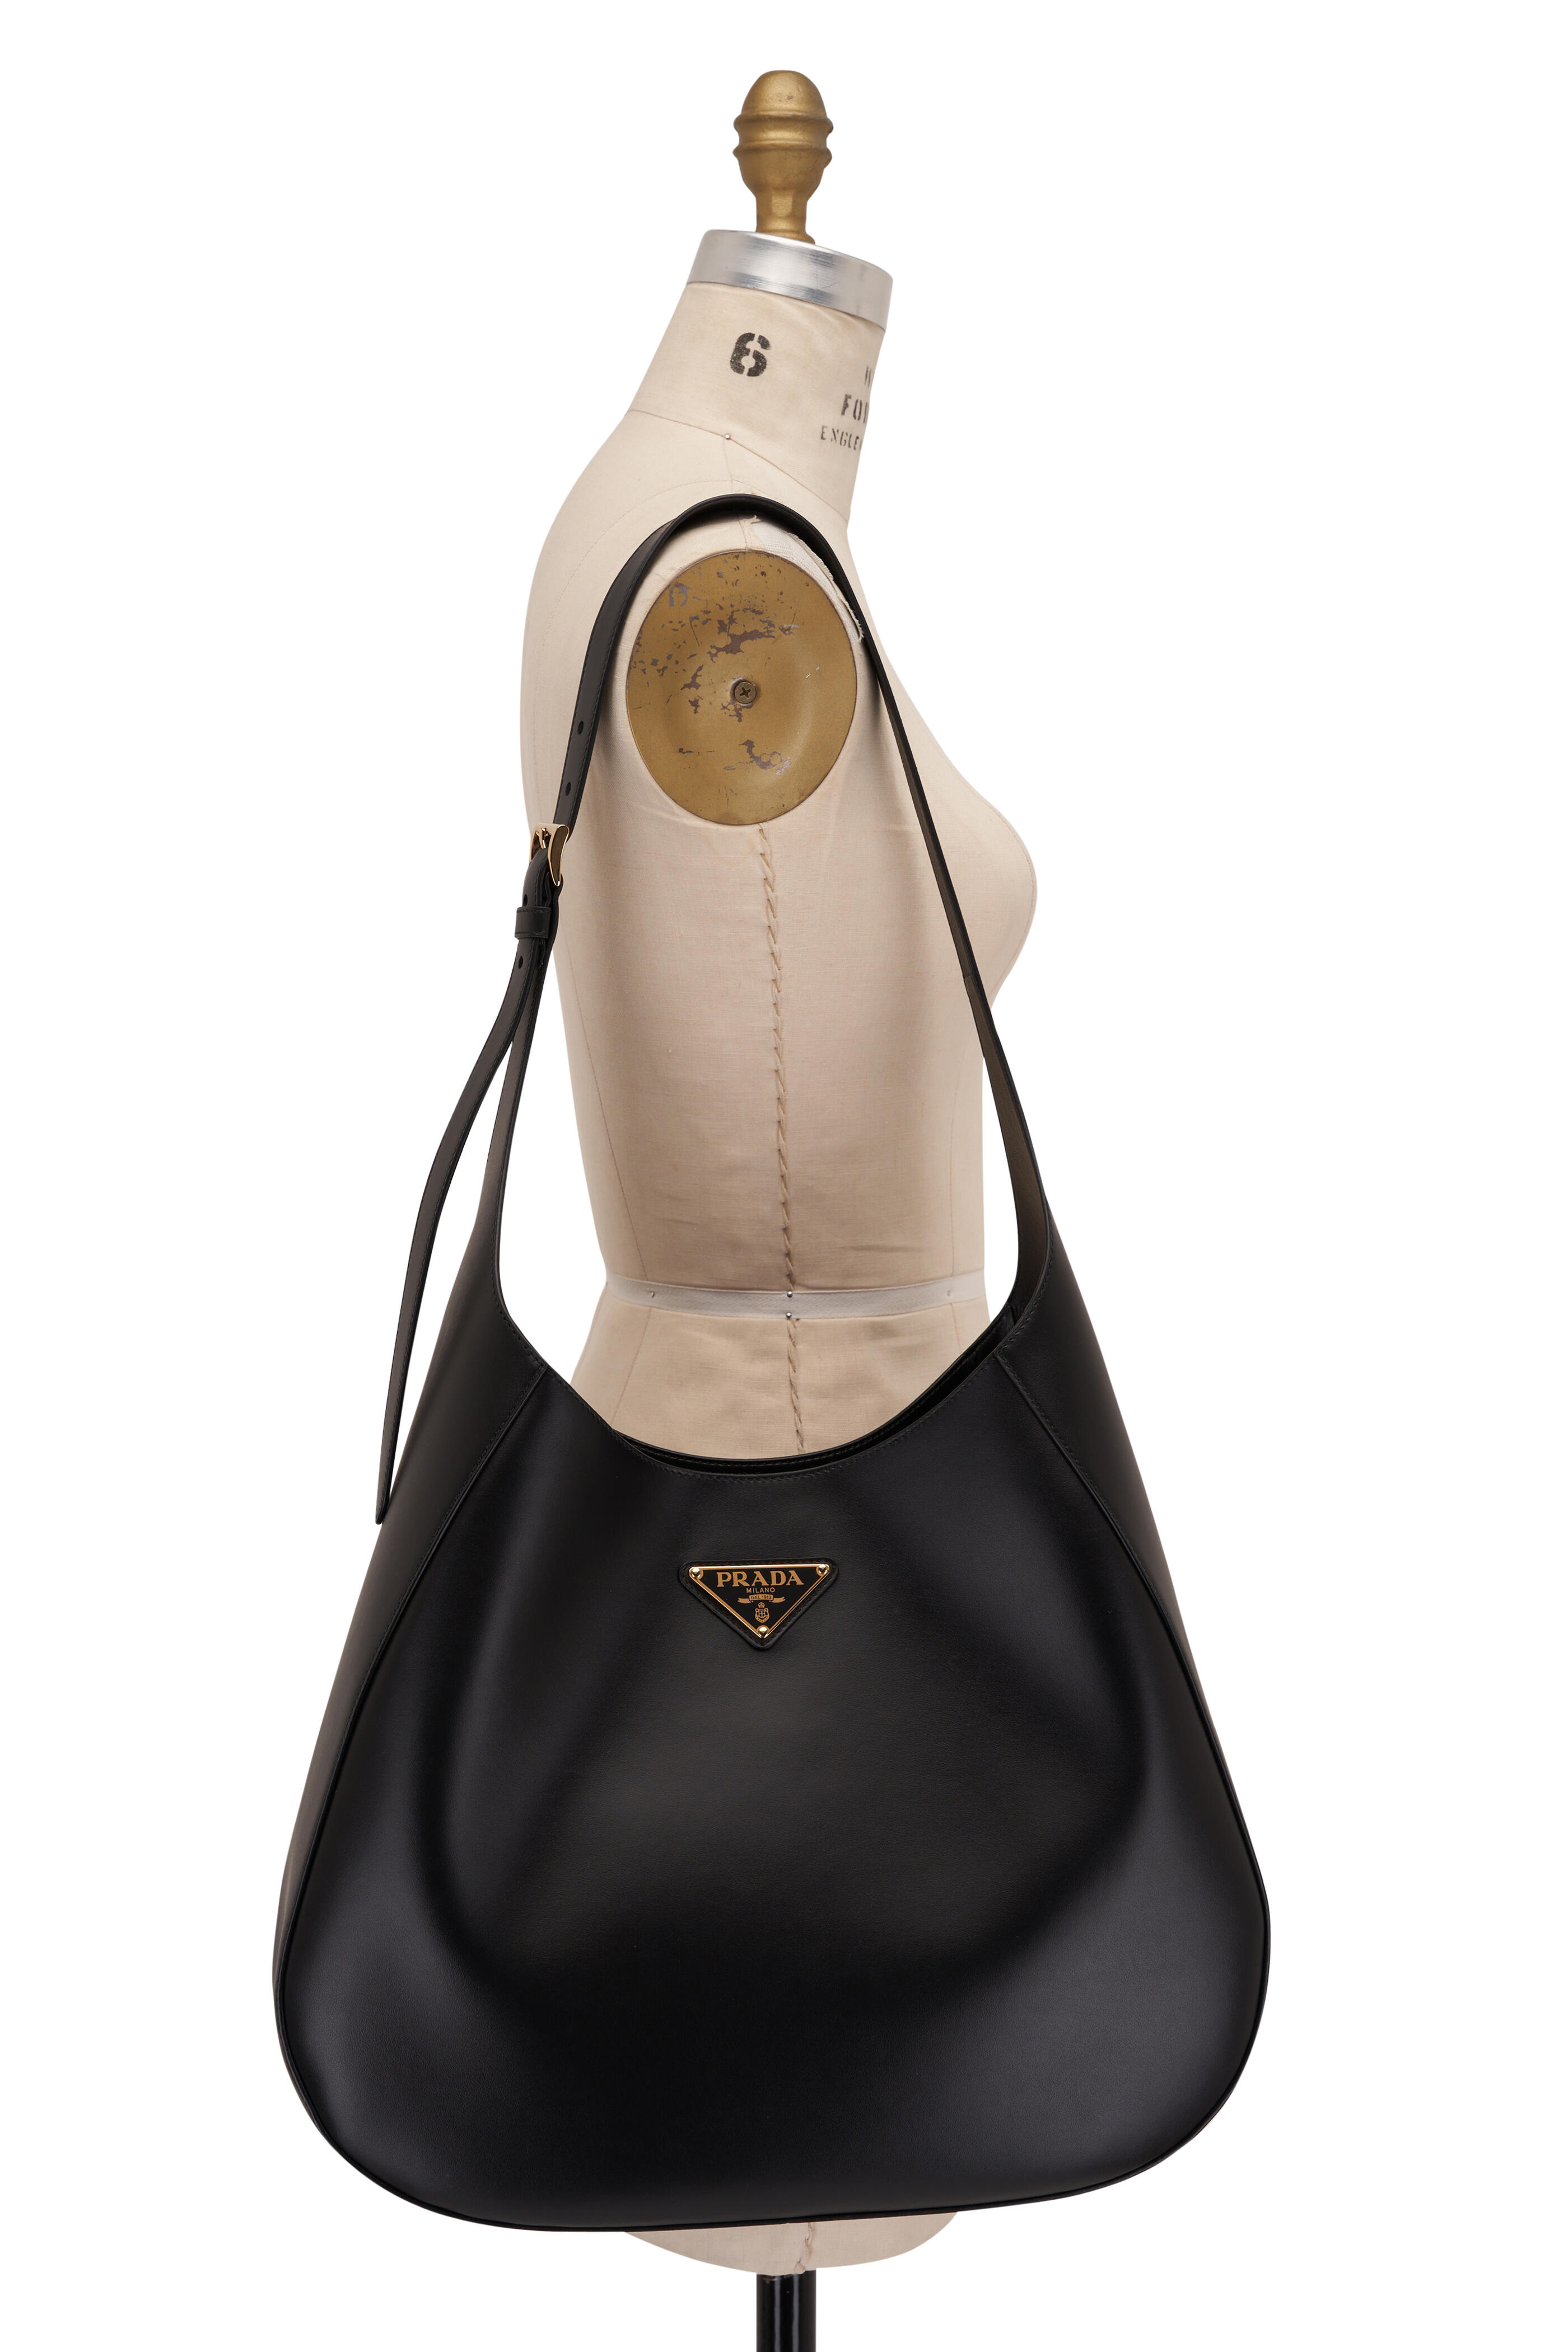 Prada Women's Black Large Leather Top Stitch Shoulder Bag | by Mitchell Stores